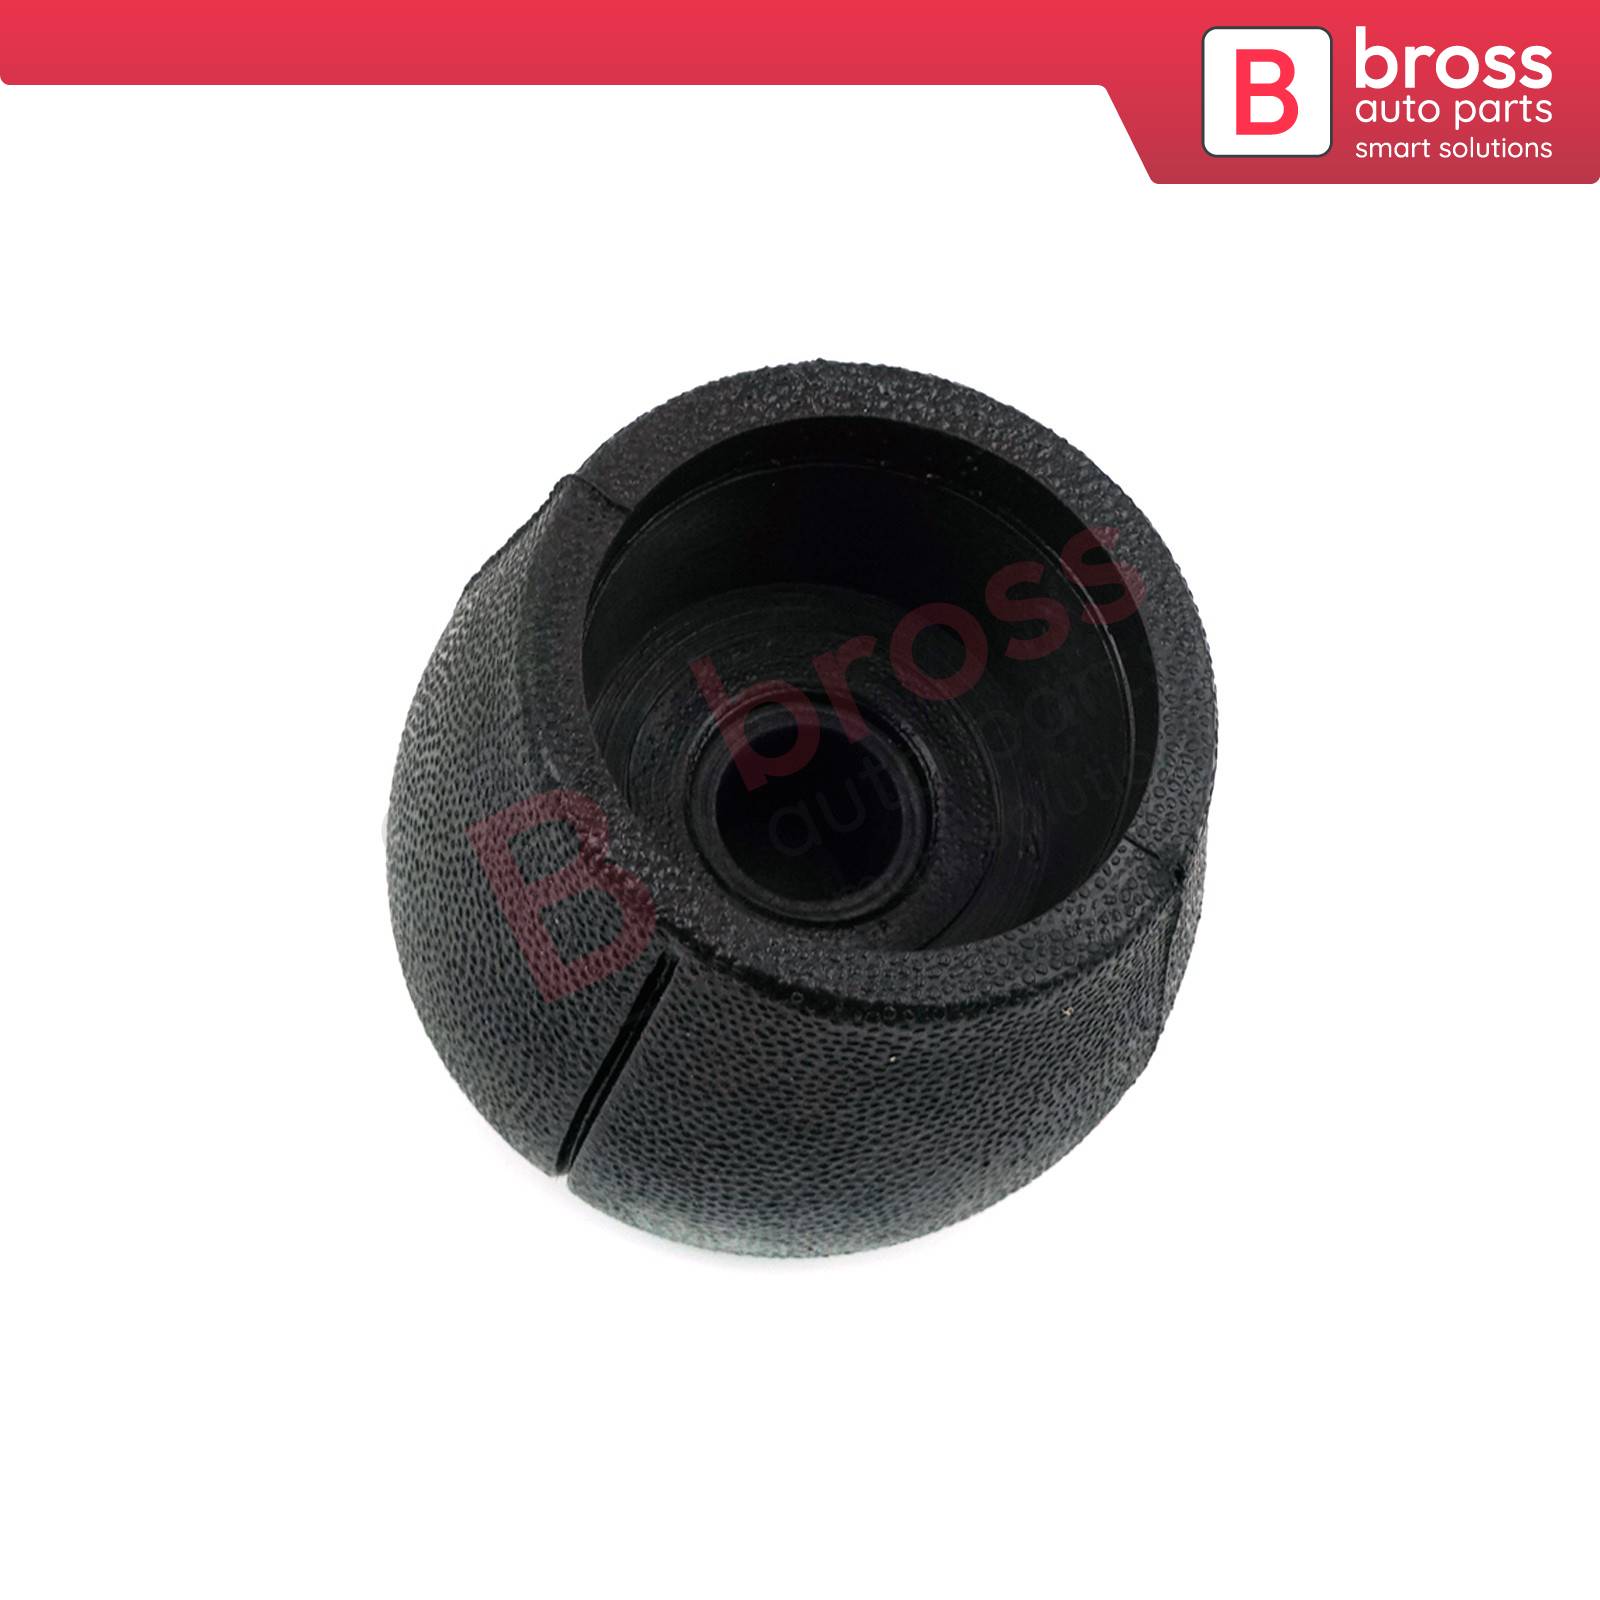 5 Speed Gear Stick Shift Knob Car Accessories Fit for Opel Vectra